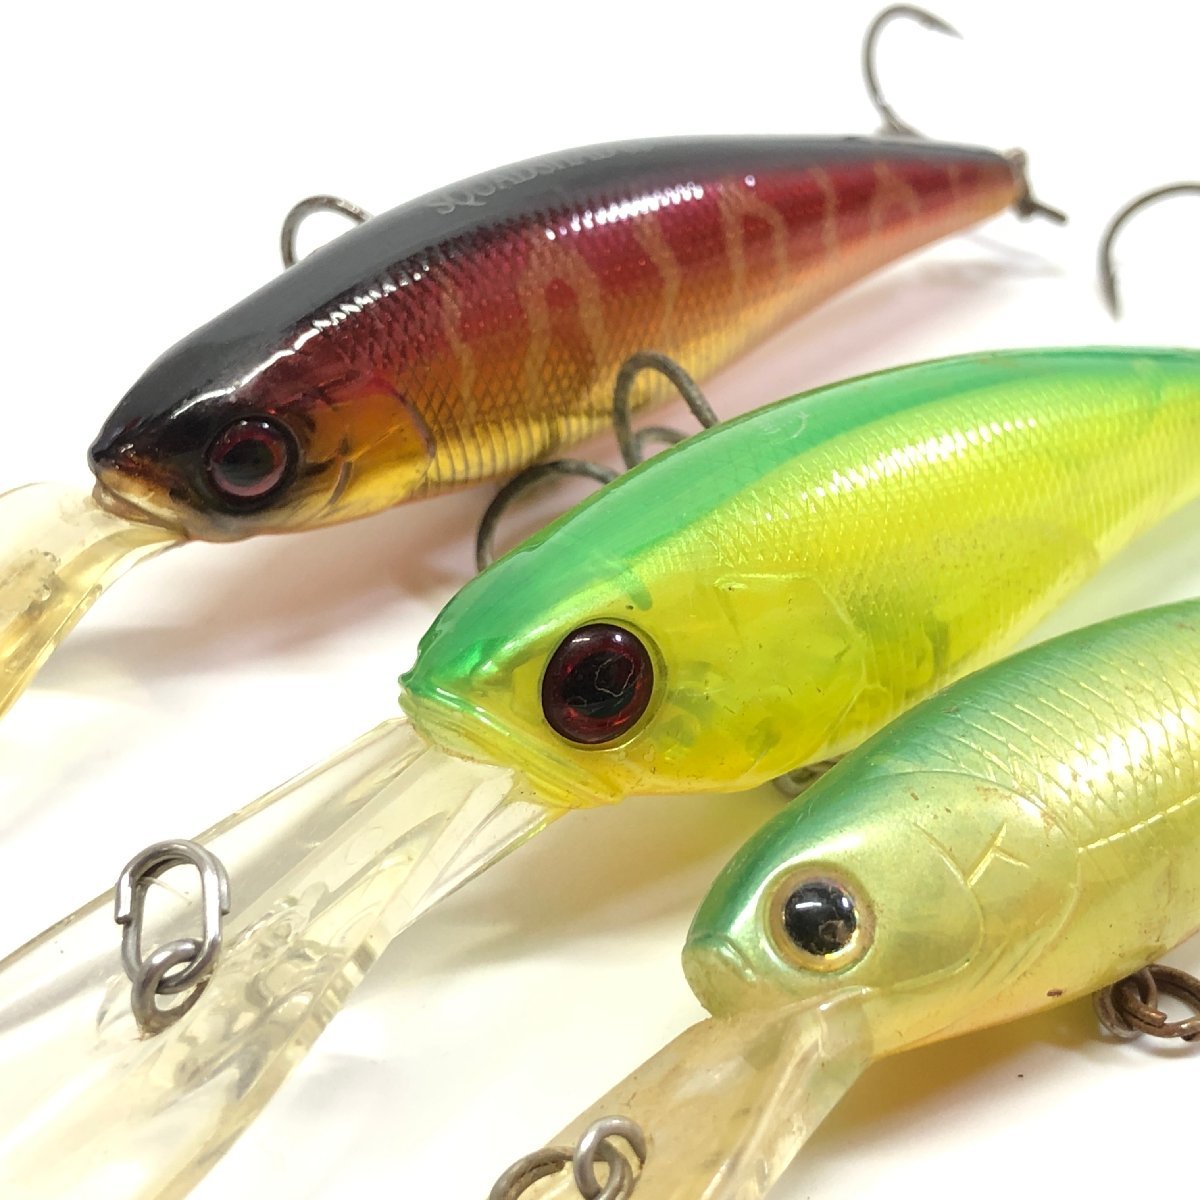 K 138 Shad lure 3 piece set soul Shad ska do Shad stay si-| Jackal Lucky Craft bus fishing lure 